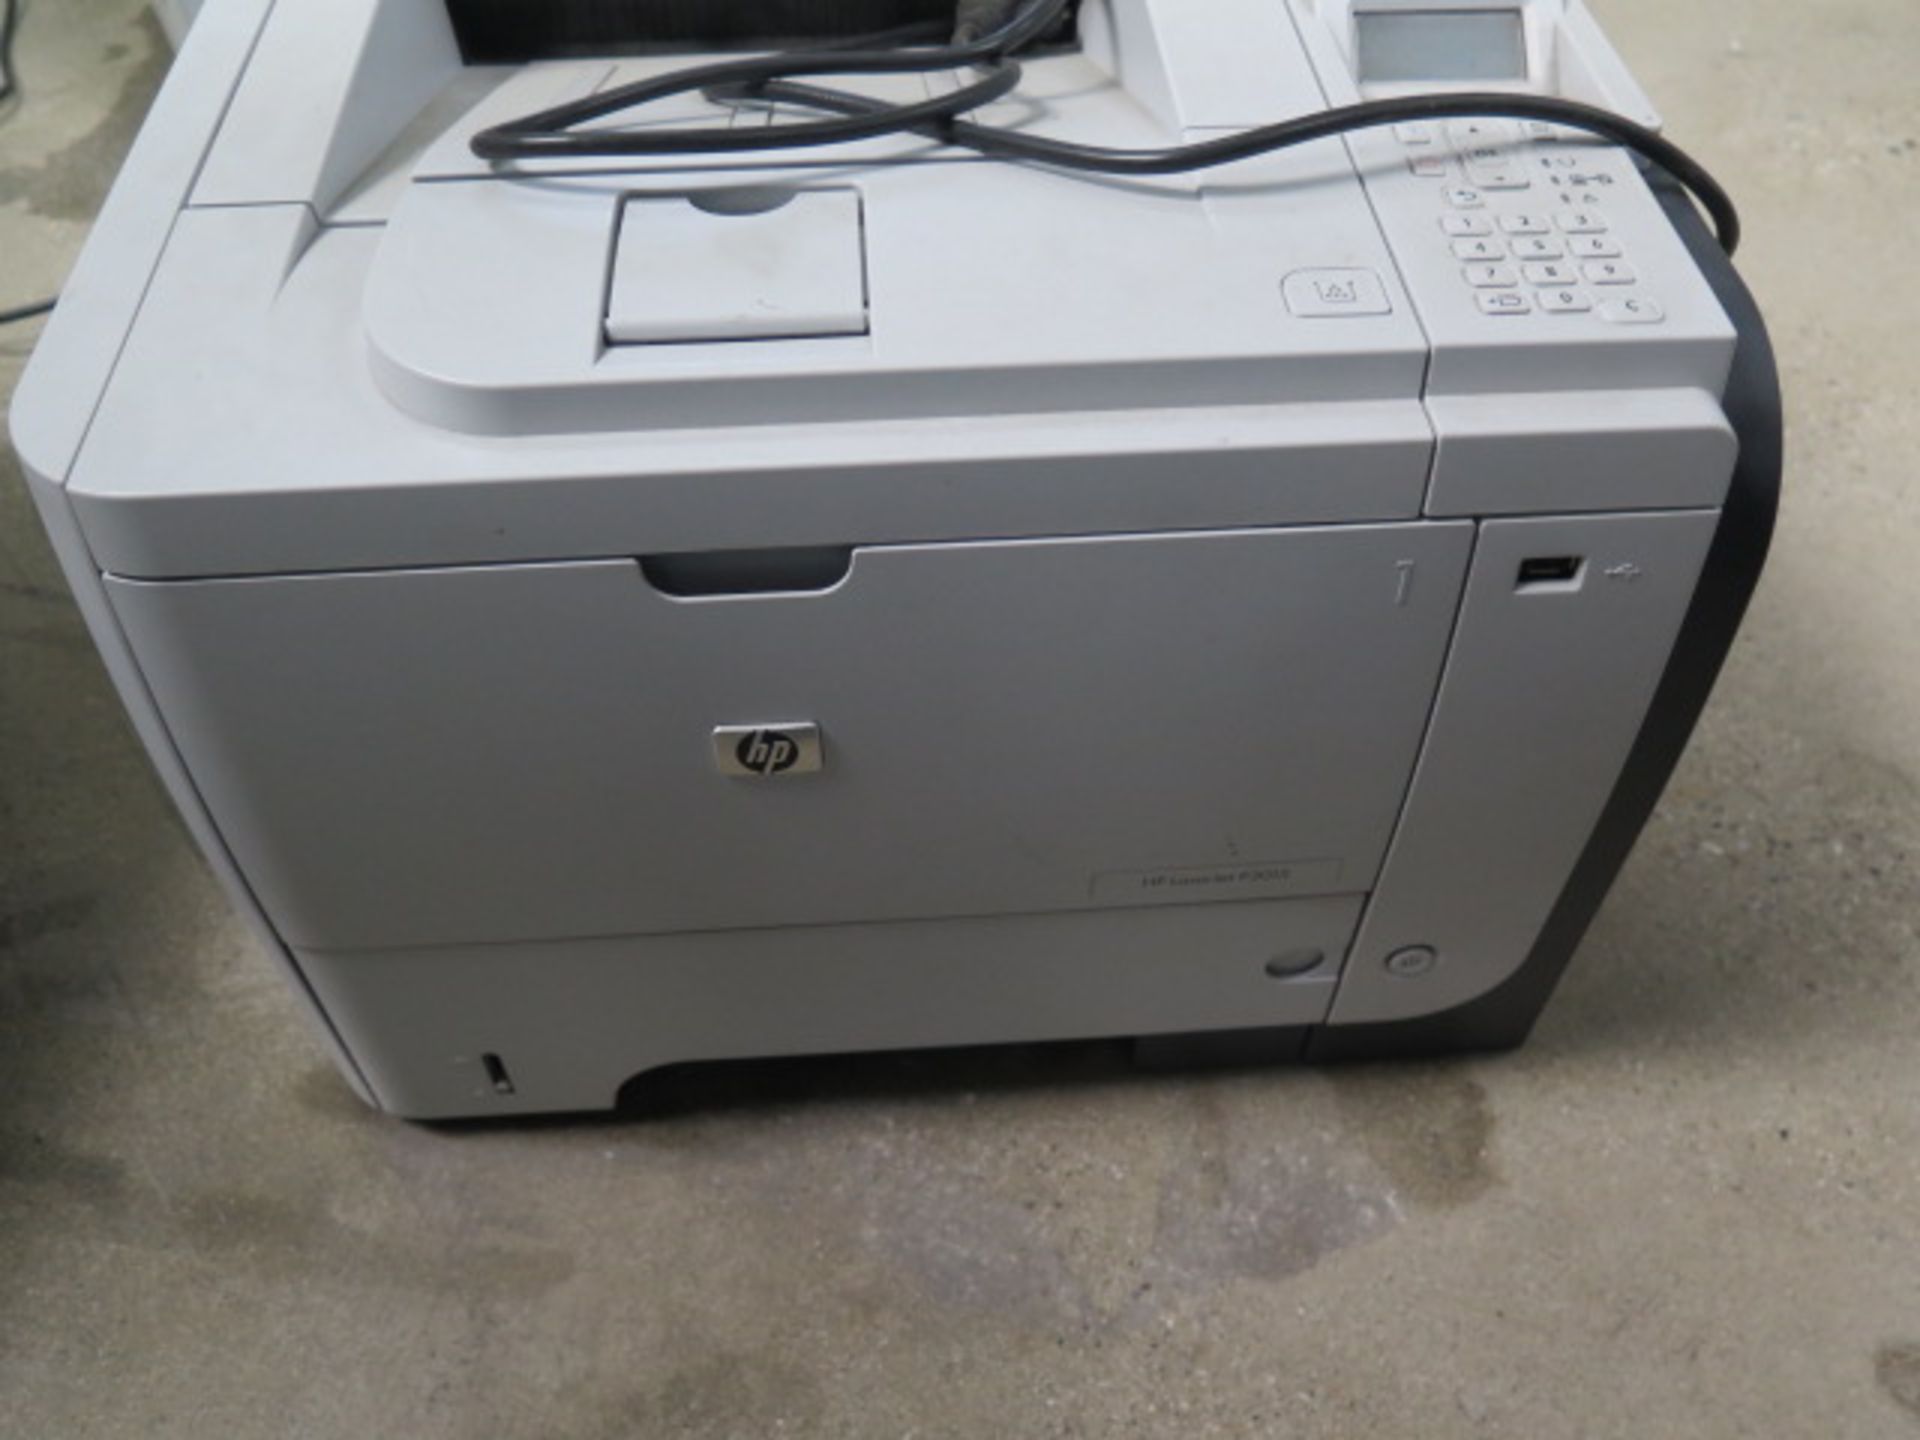 Copy and FAX Machines (3) - Image 2 of 3